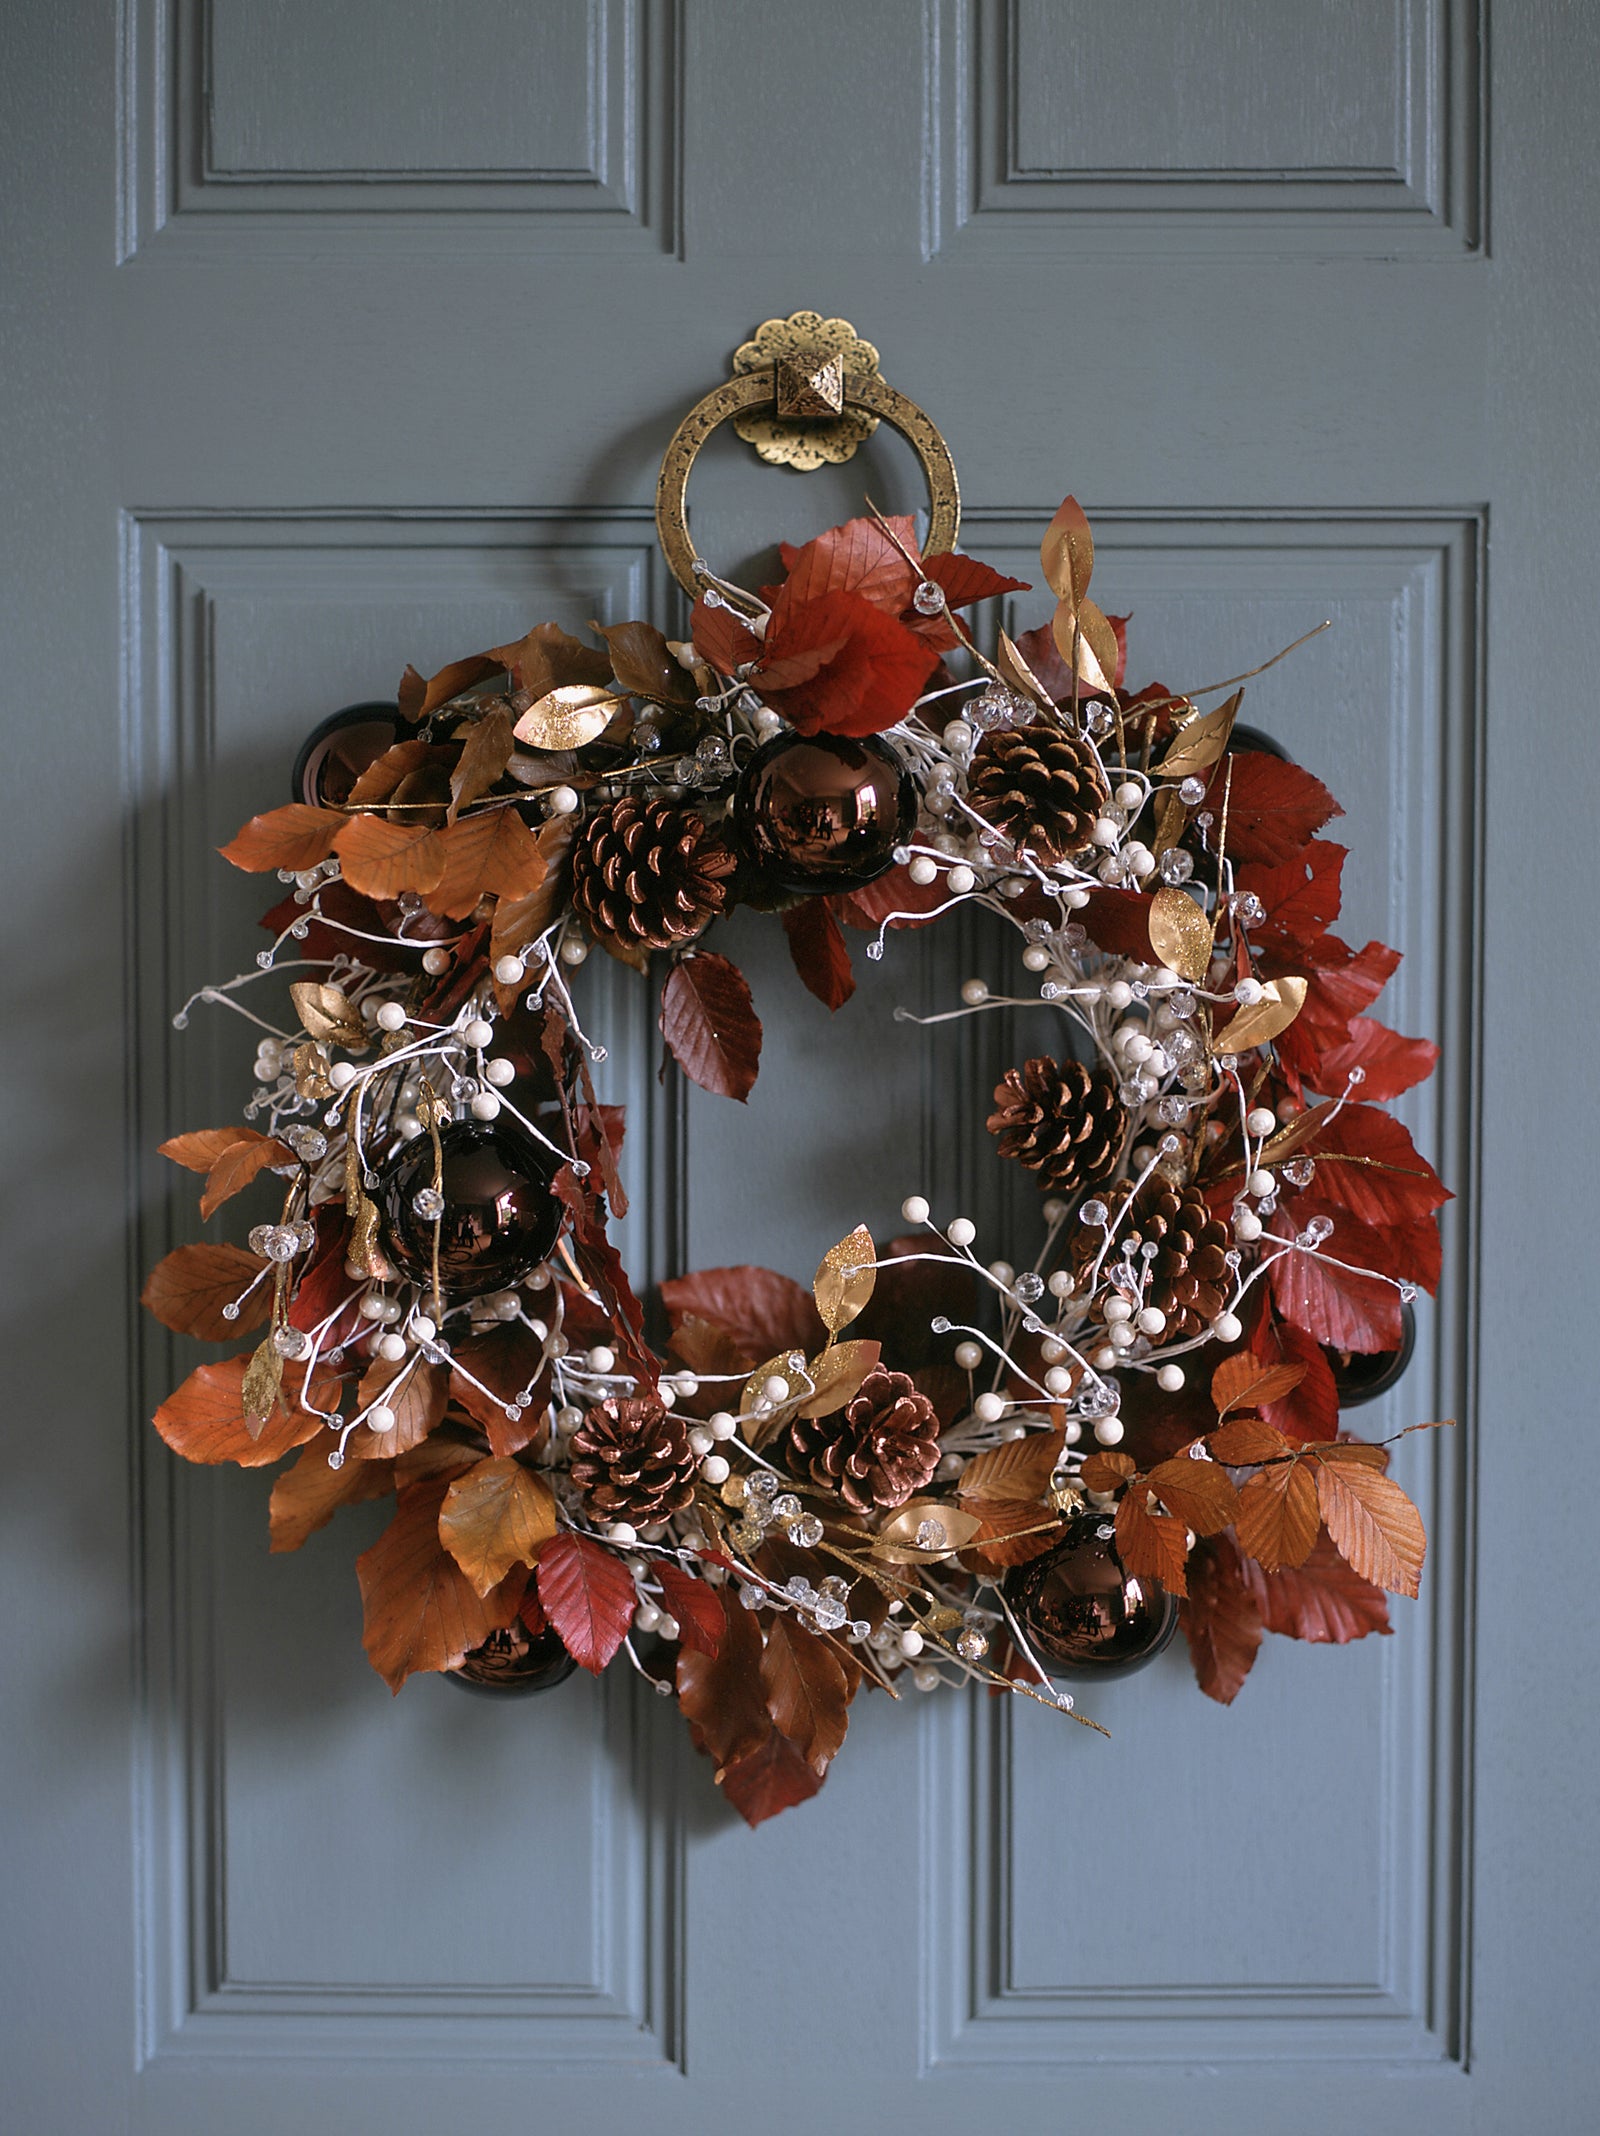 Leaf wreath with pine cones, berries, gold leaves, and baubles